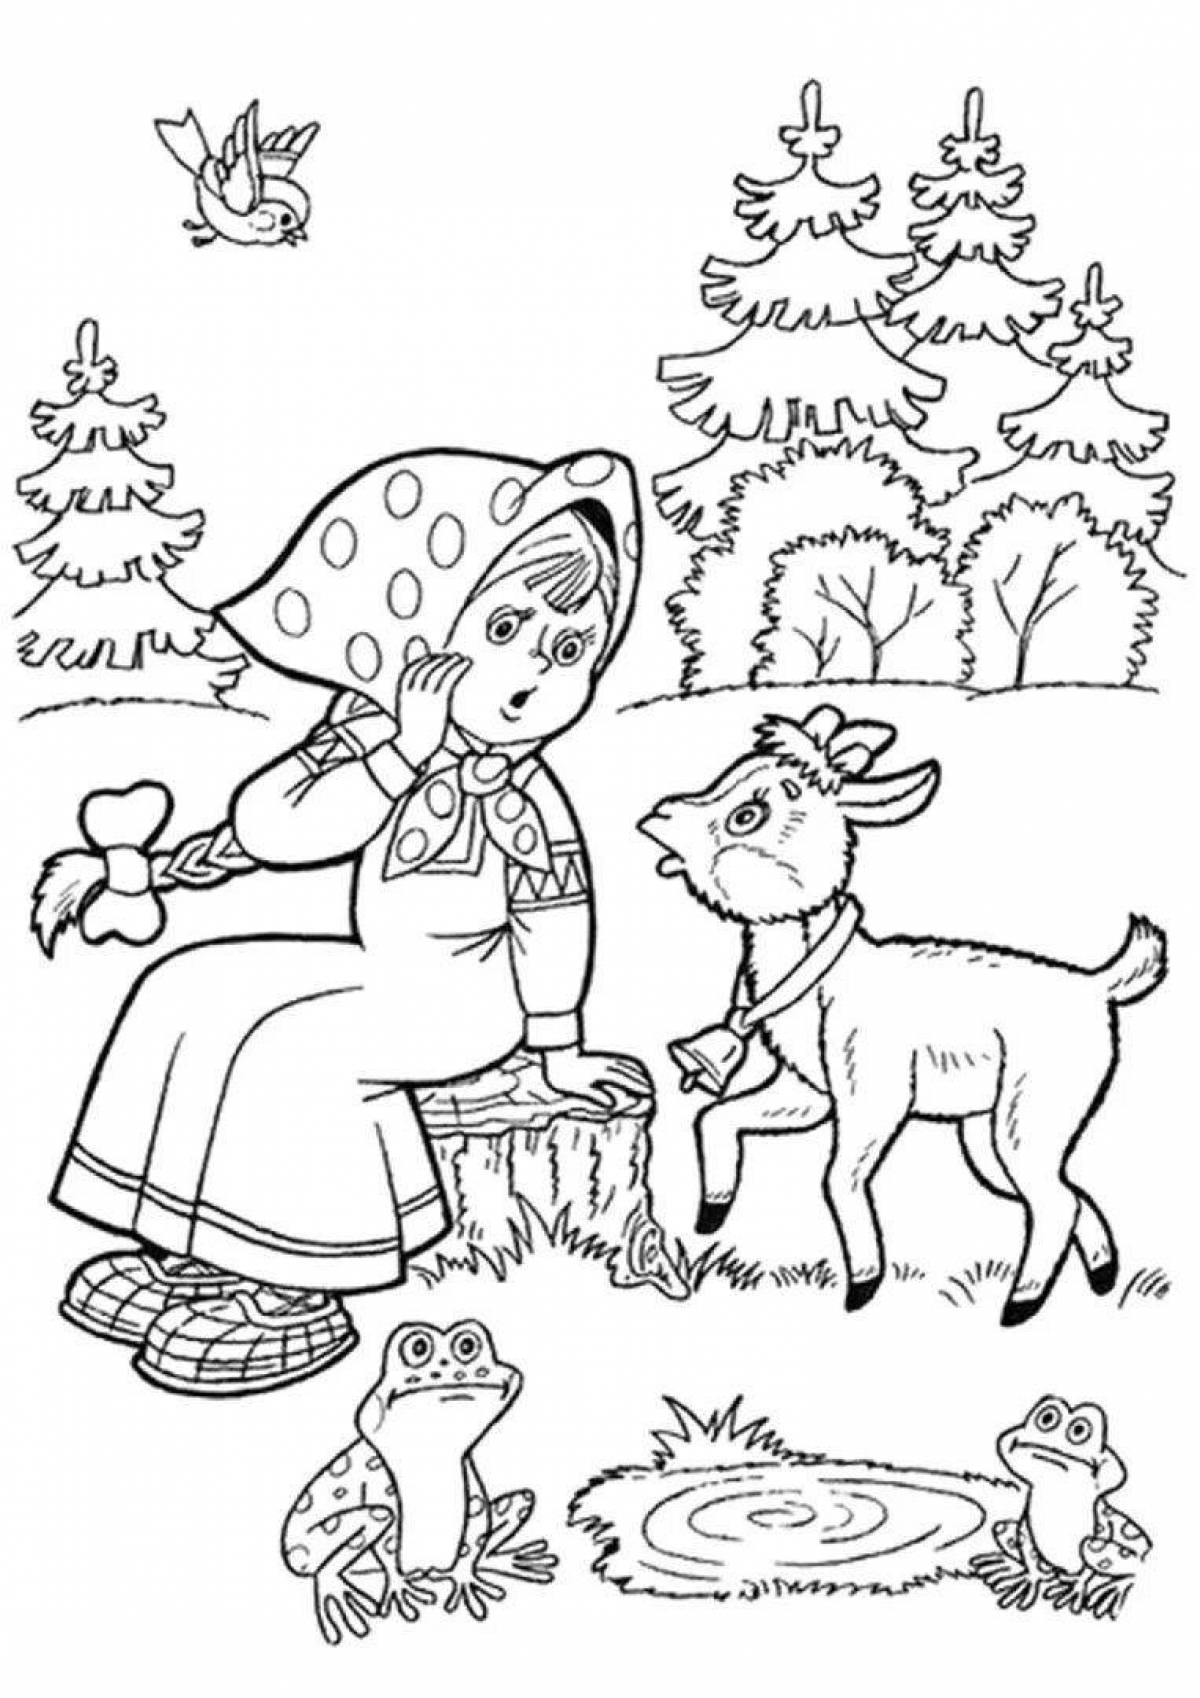 Exquisite coloring book based on Russian folk tales